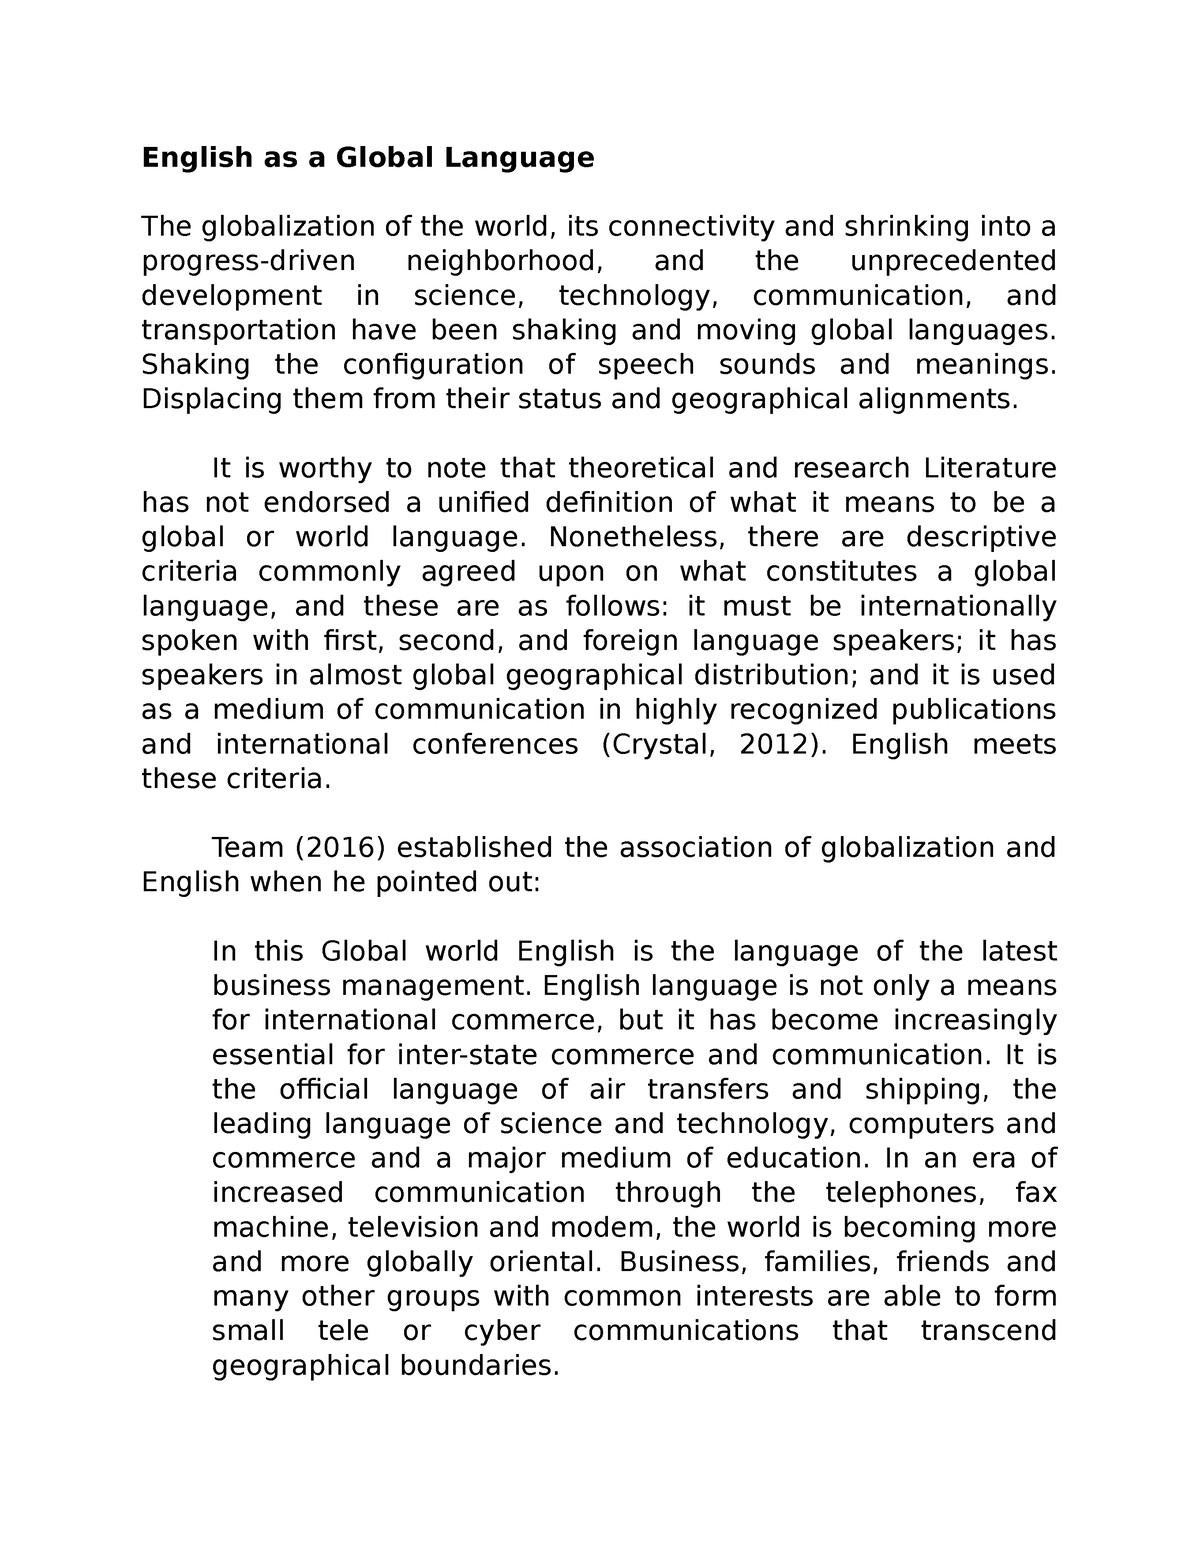 essay of english as a global language